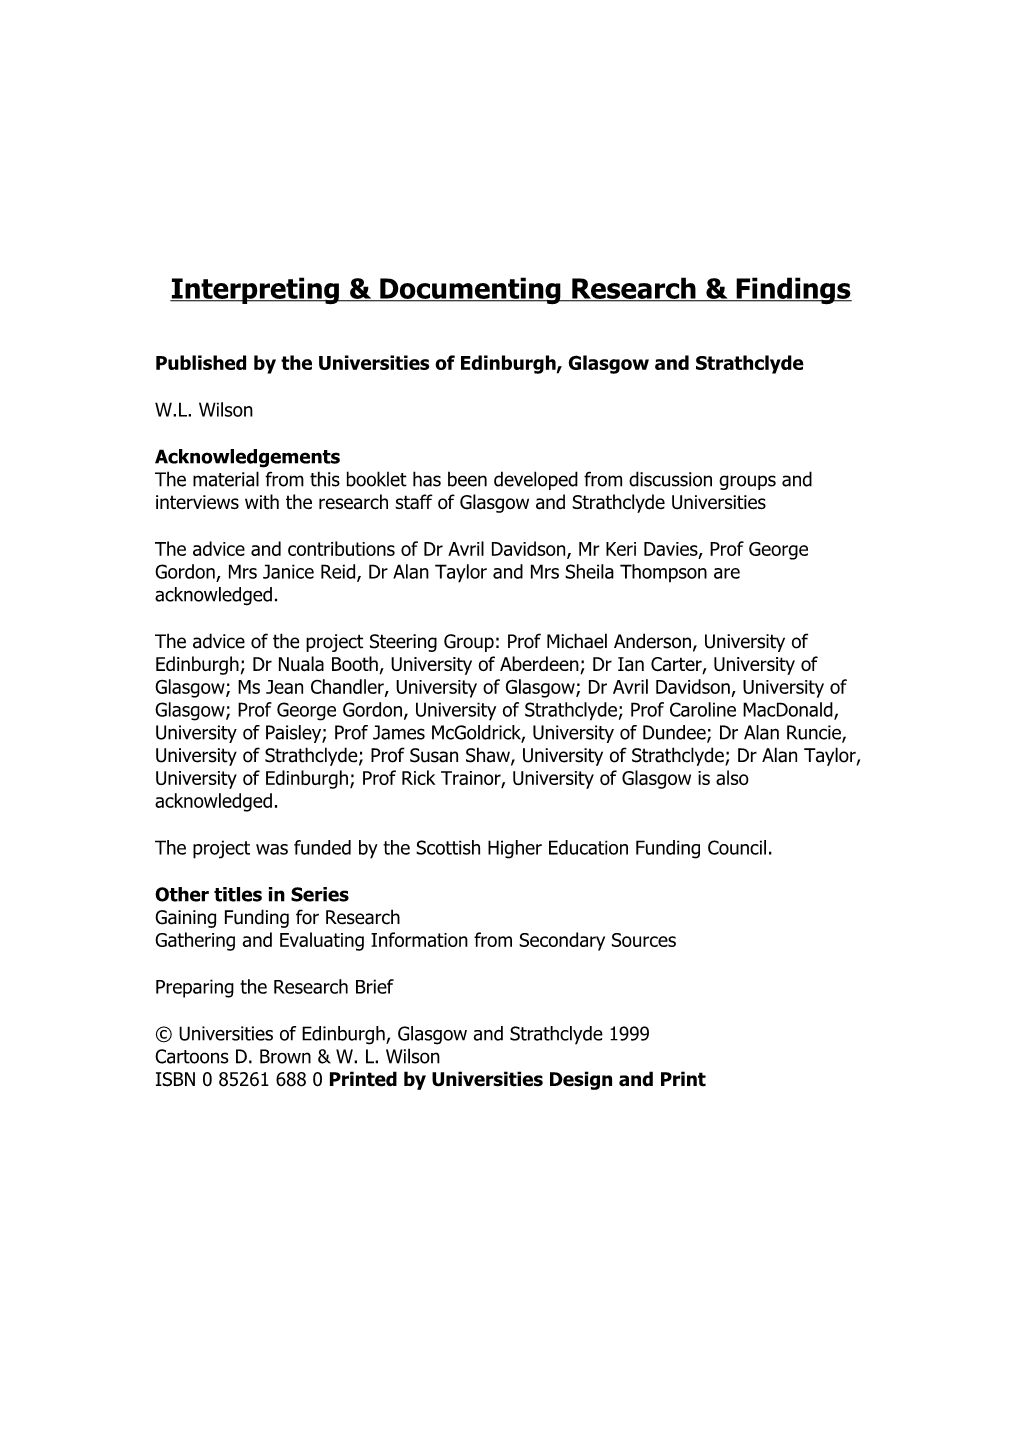 Interpreting & Documenting Research & Findings